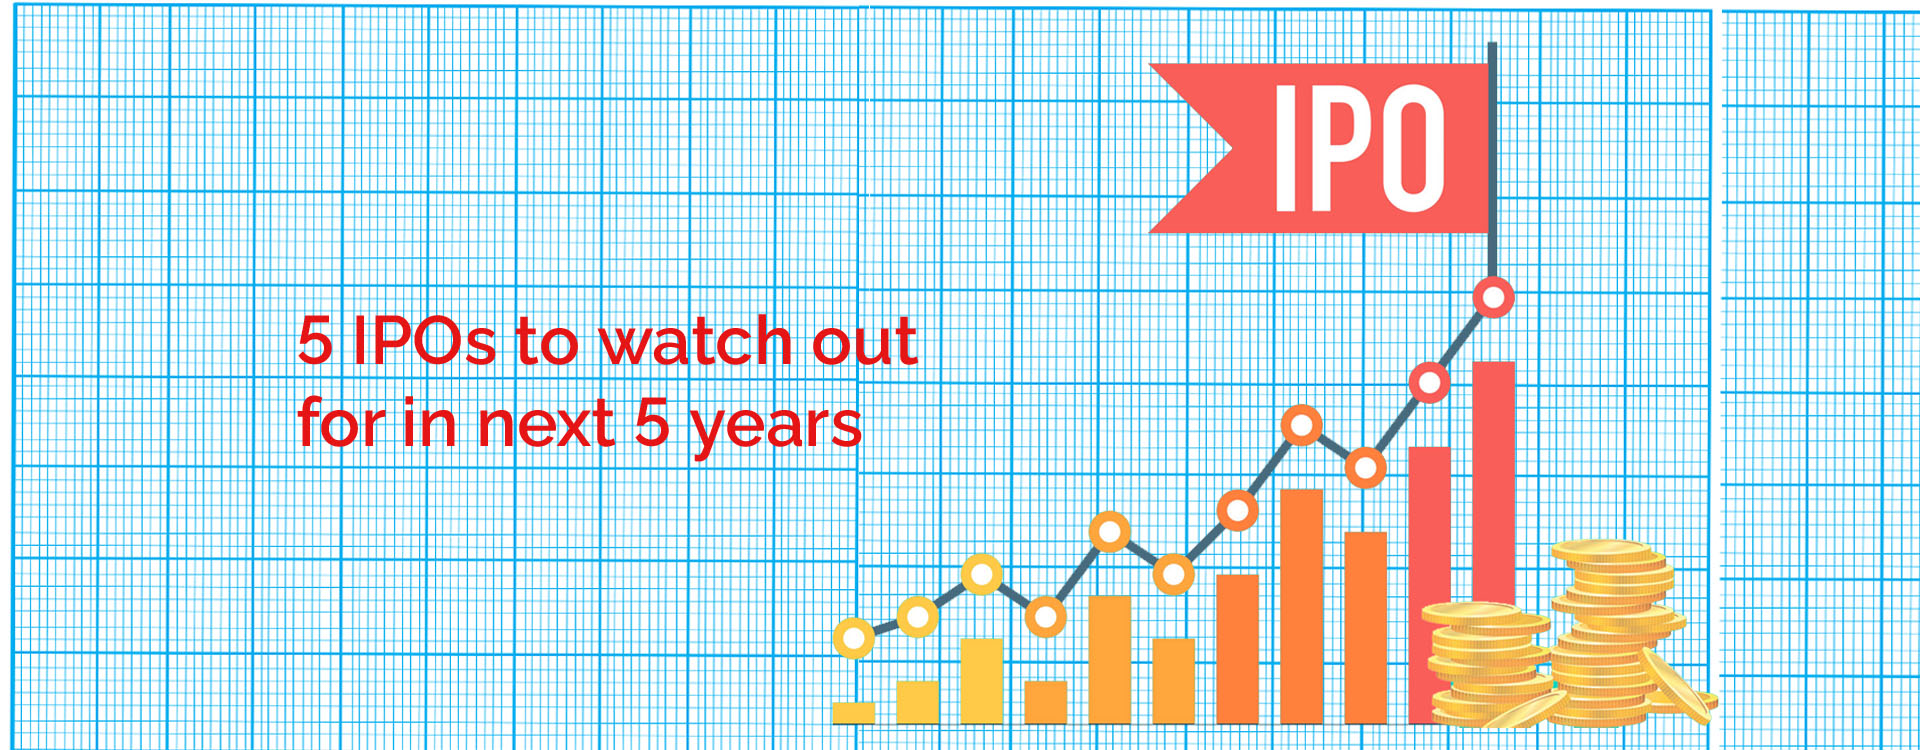 Start-up IPOs to watch out for in next 5 years